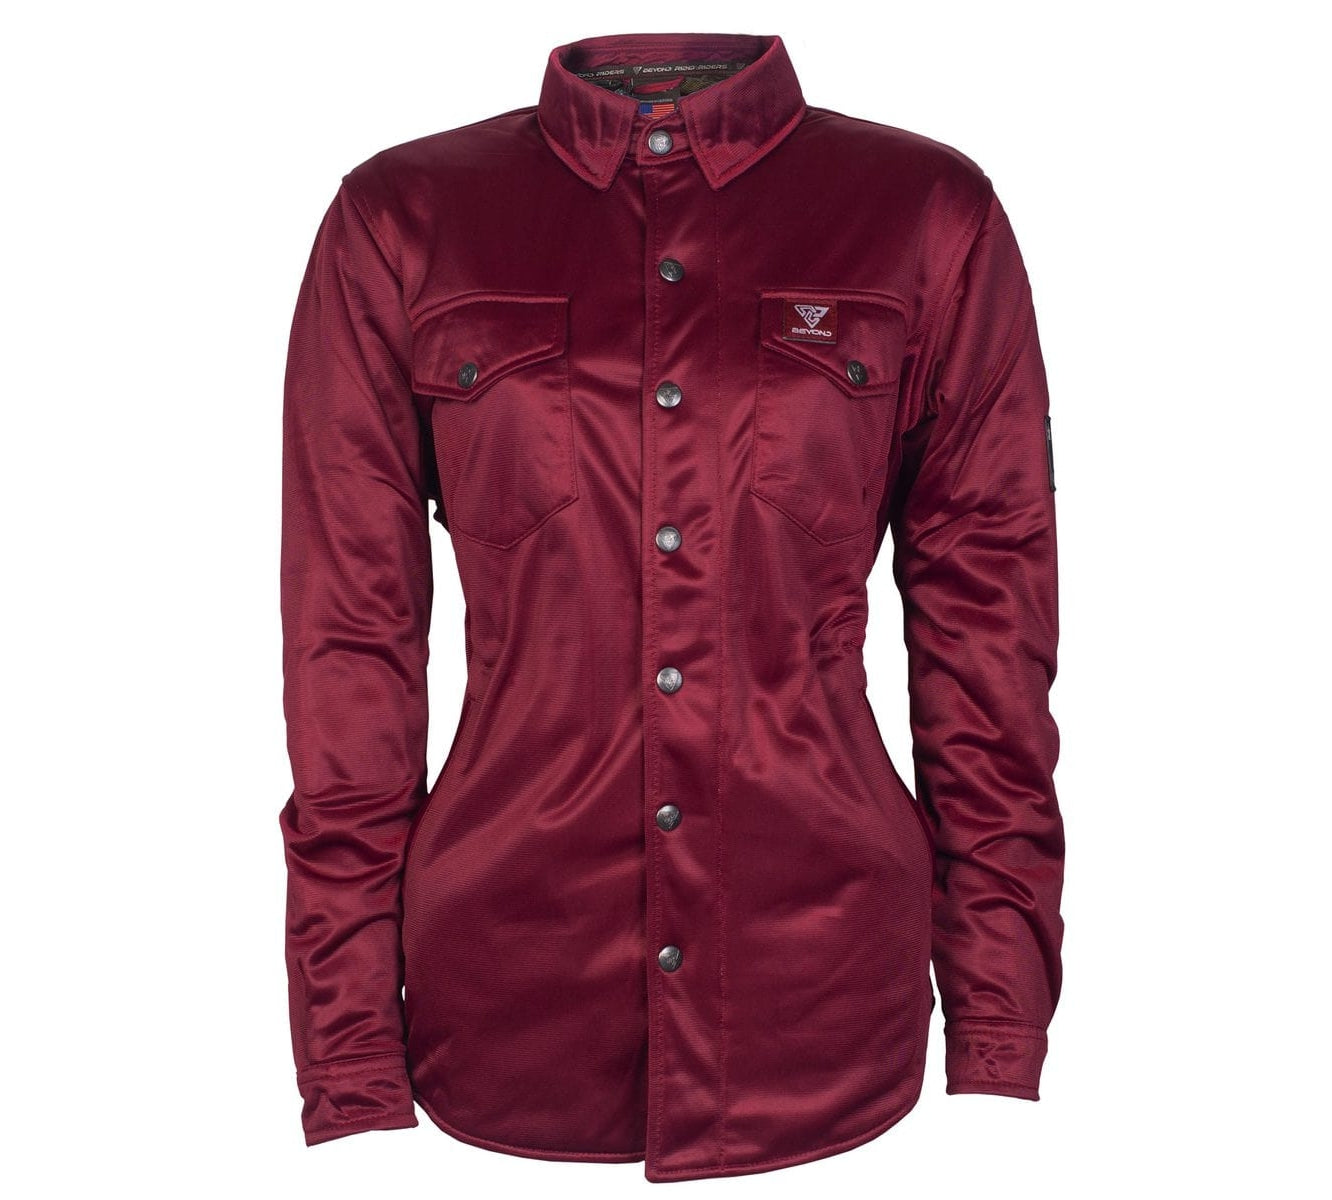 Ultra Protective Shirt for Women - Red Maroon Solid